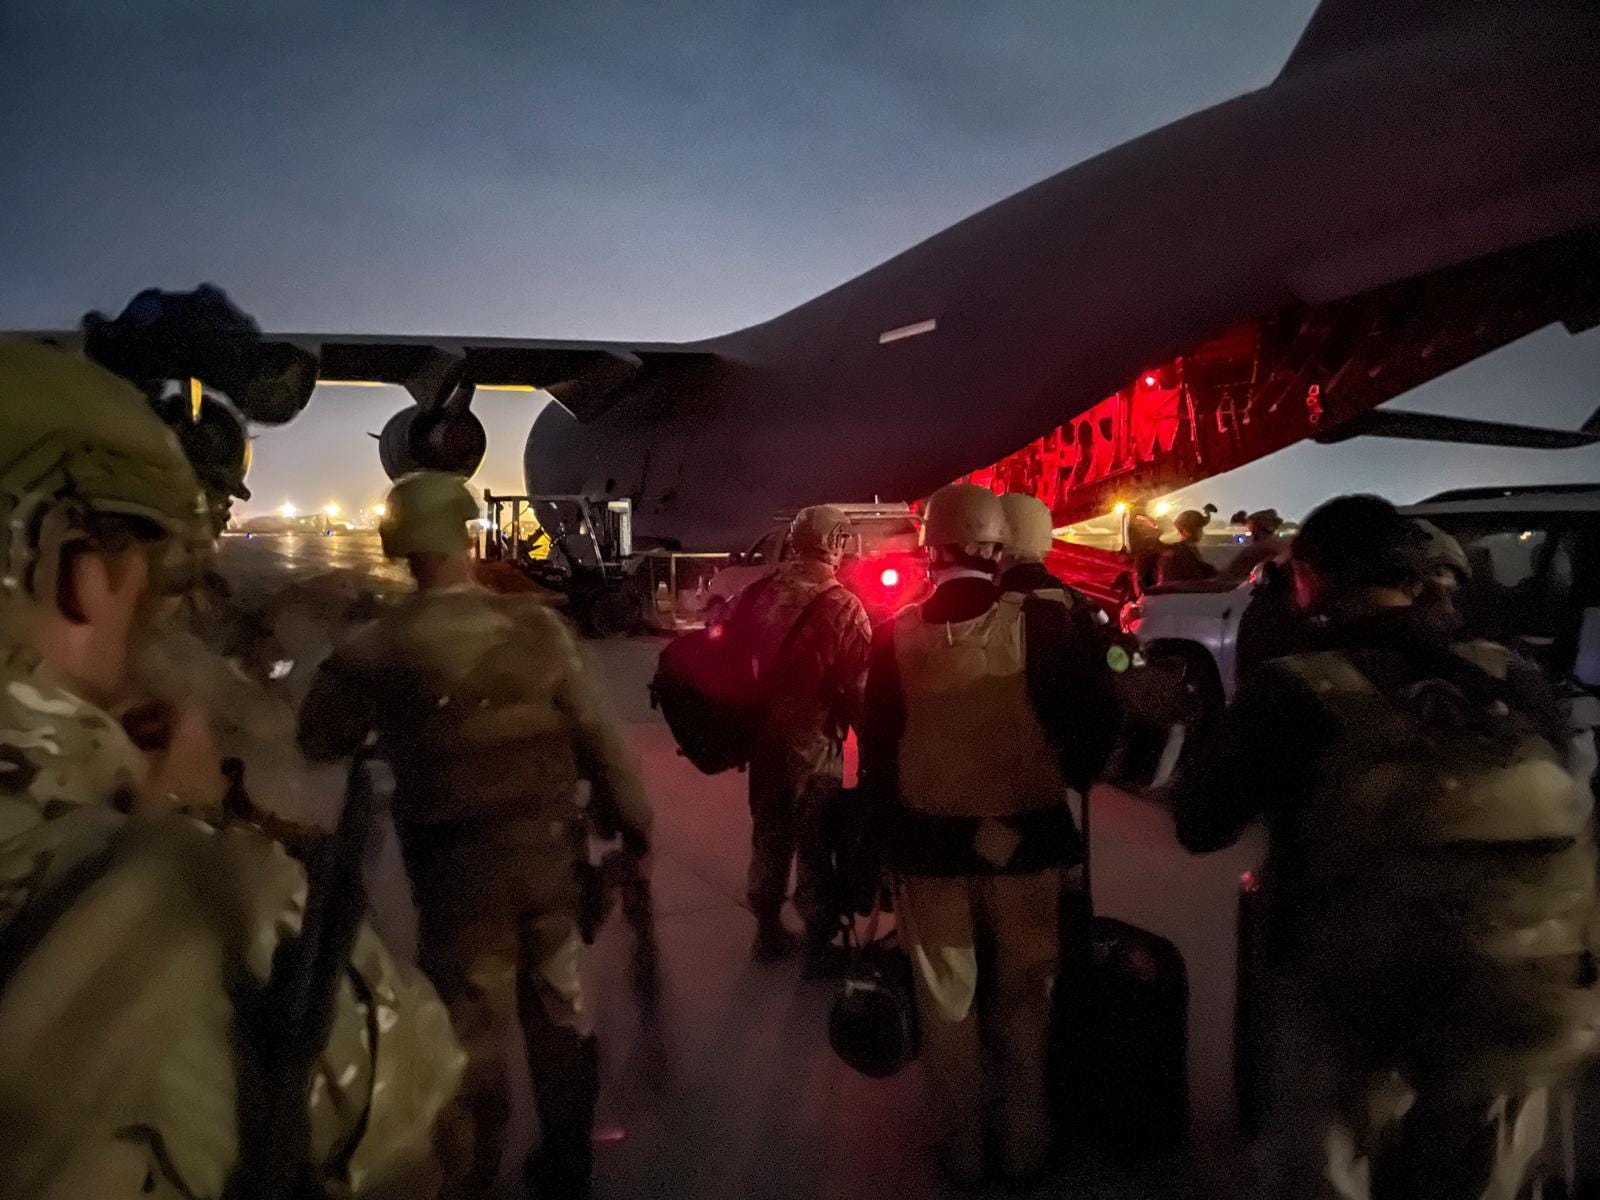 82nd Airborne paratroopers board C-17 during Afghanistan evacuation